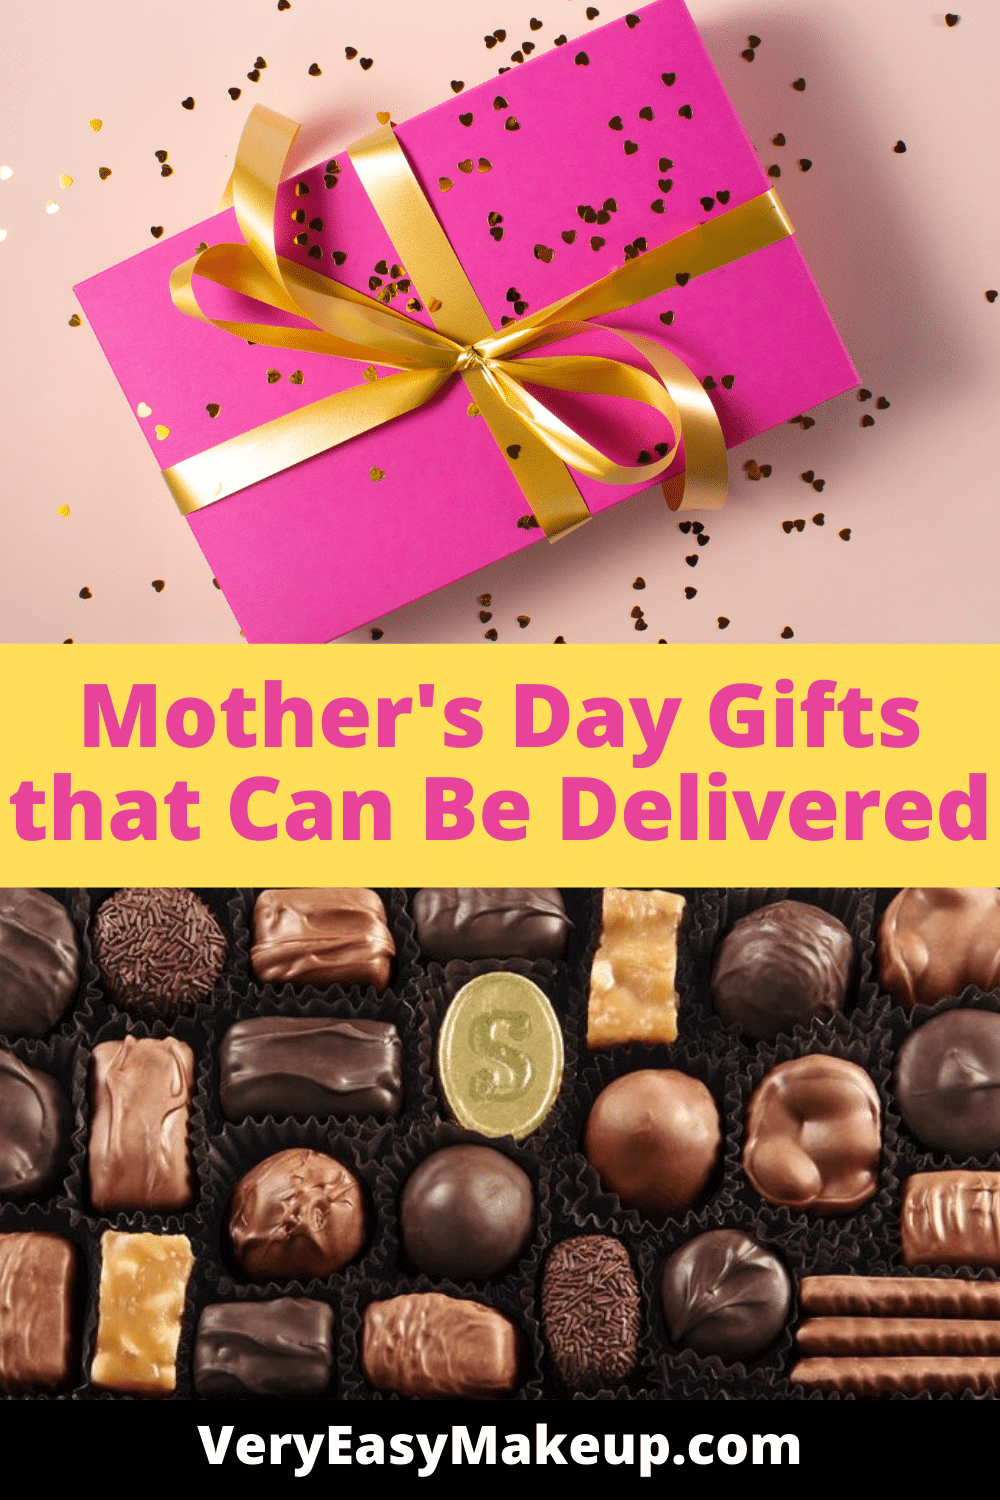 Mother's Day Gifts That Can Be Delivered and Gift Ideas by VeryEasyMakeup.com